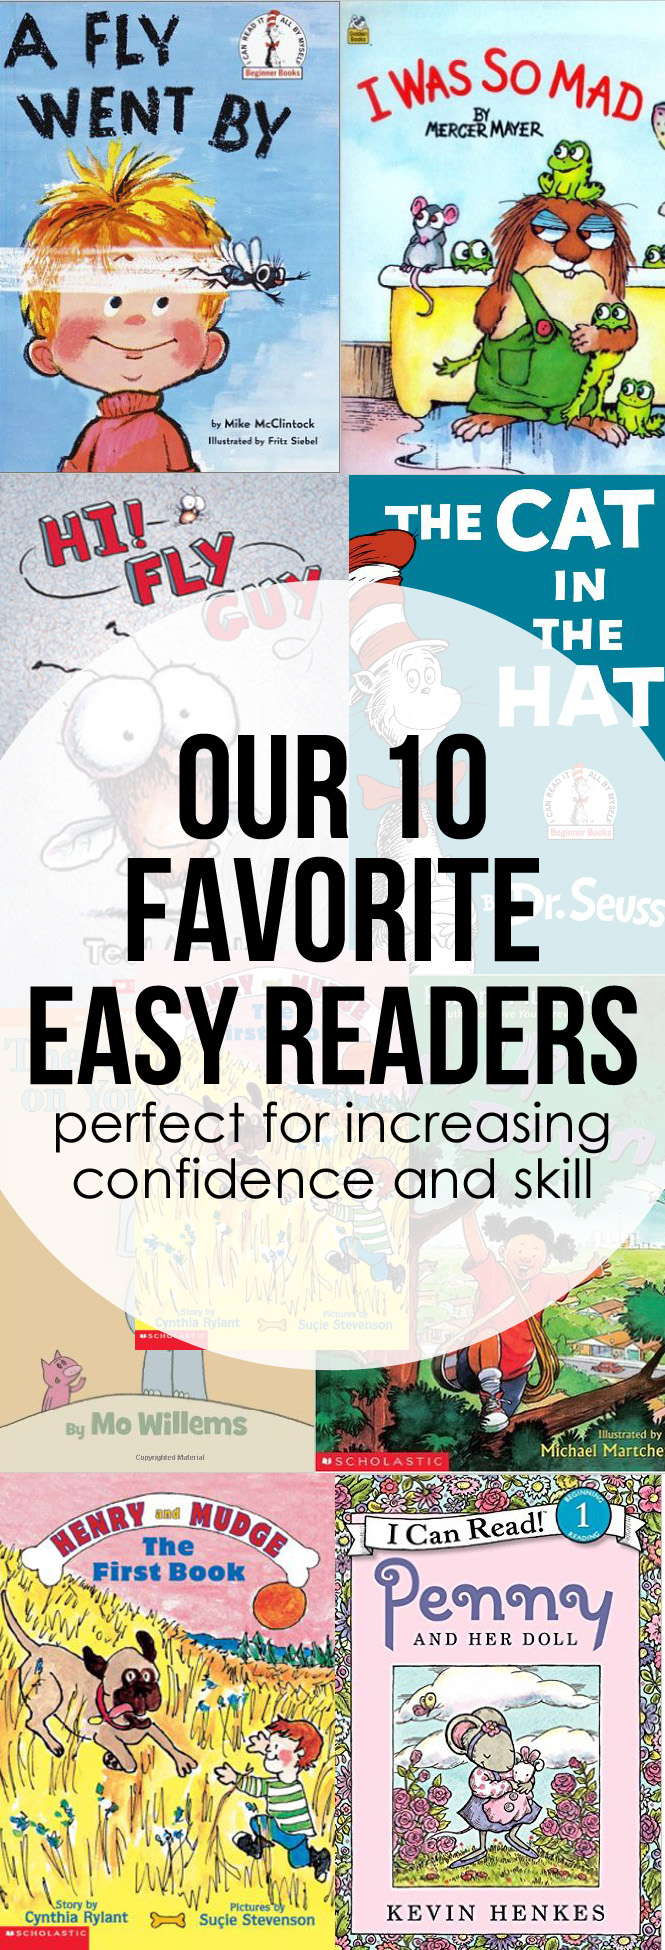 Our Favorite Easy Readers